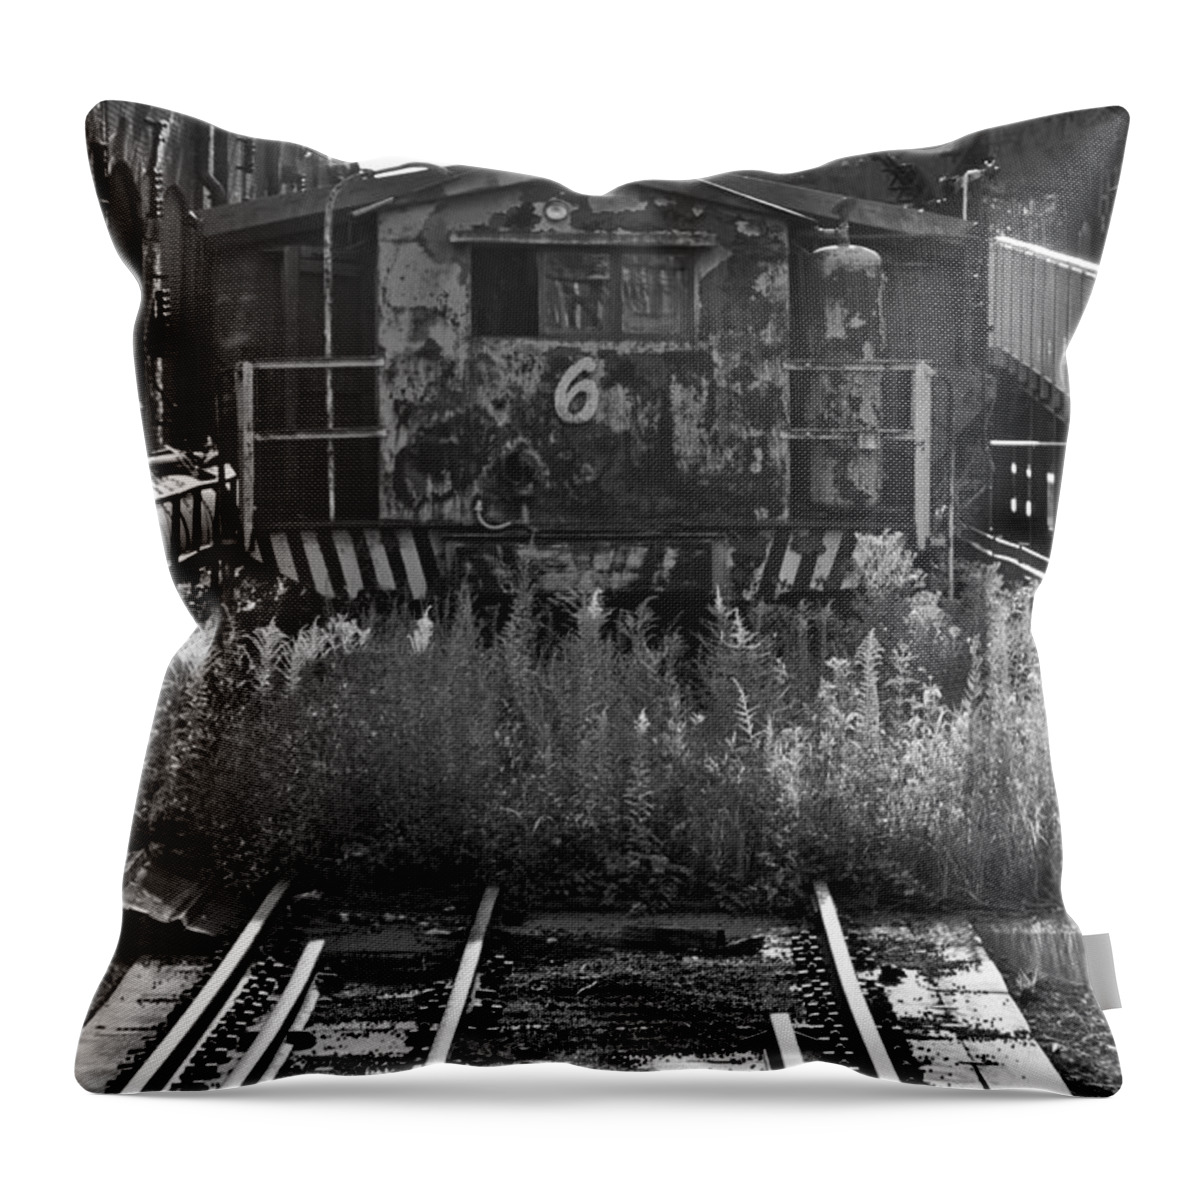 Bethlehem Steel Throw Pillow featuring the photograph 6 by Michael Dorn